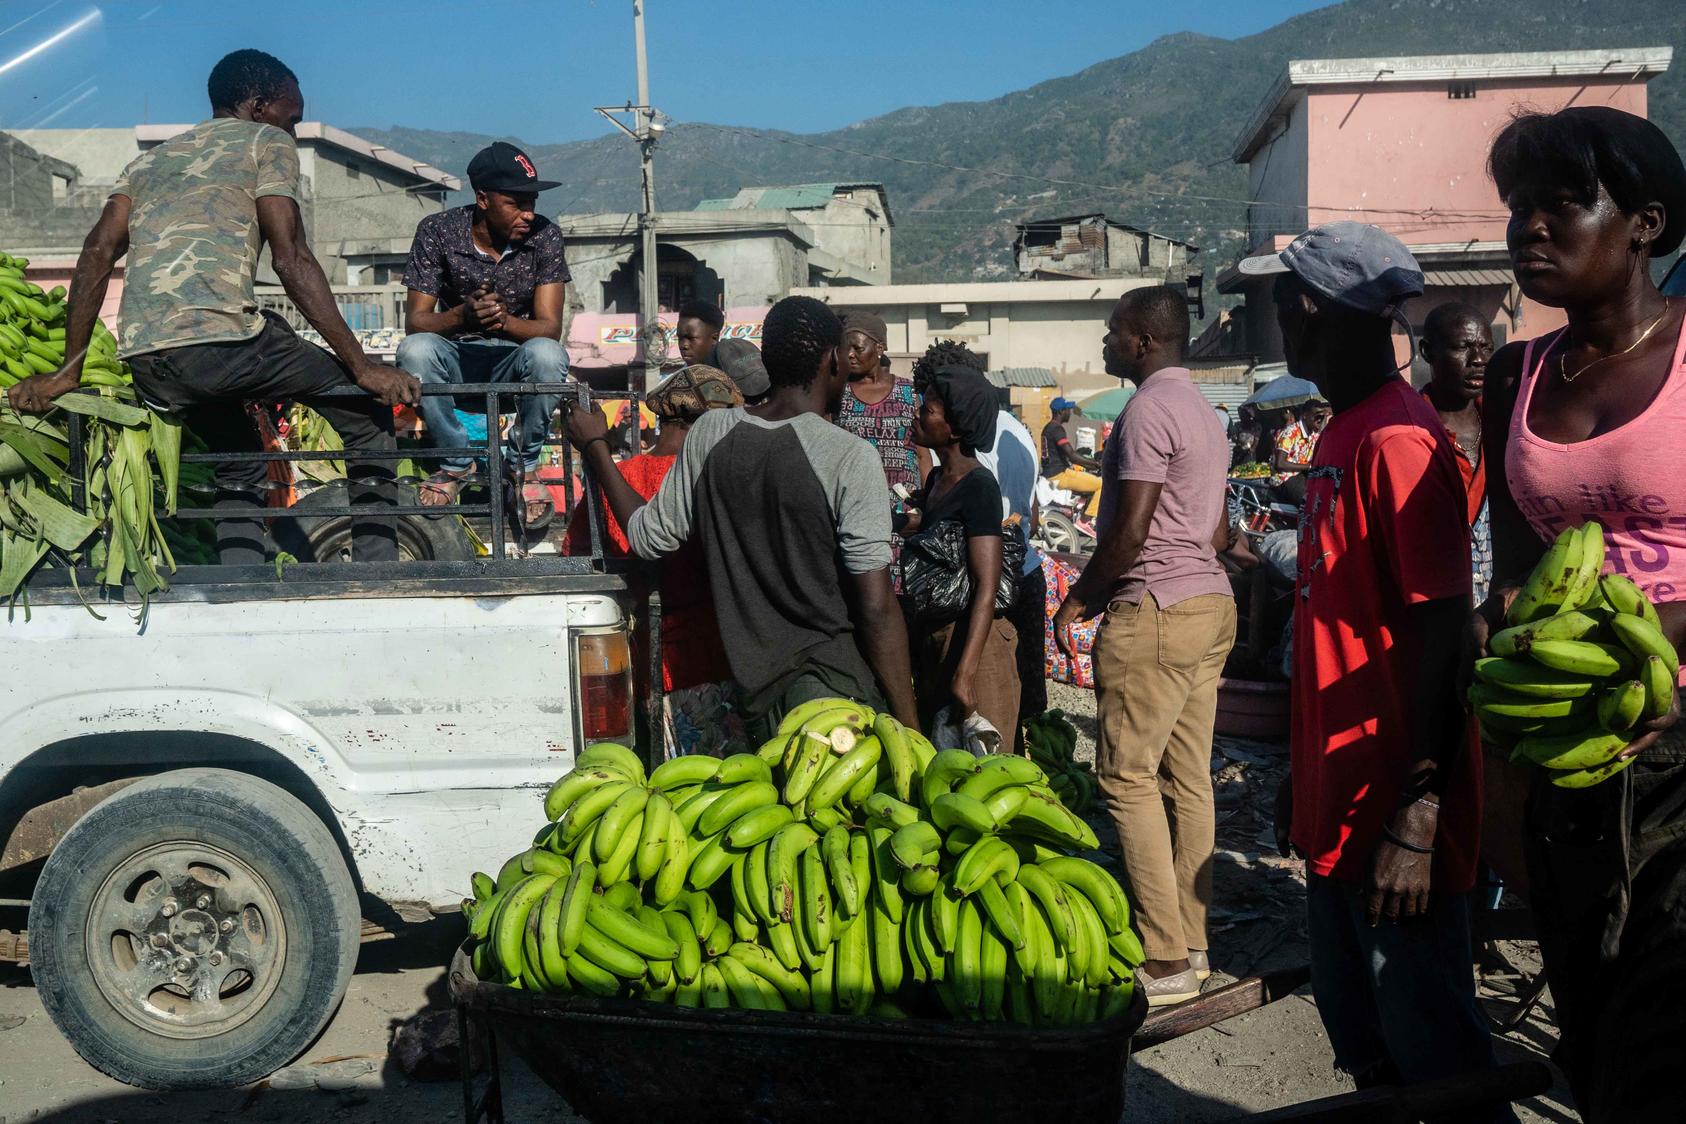 Street vendors in Cape Haitien, Haiti, July 16, 2021. A cycle of crisis and U.S. intervention in Haiti has persisted for decades, but a new U.S. plan is focused on the long term challenges facing Haiti. (Federico Rios/The New York Times)